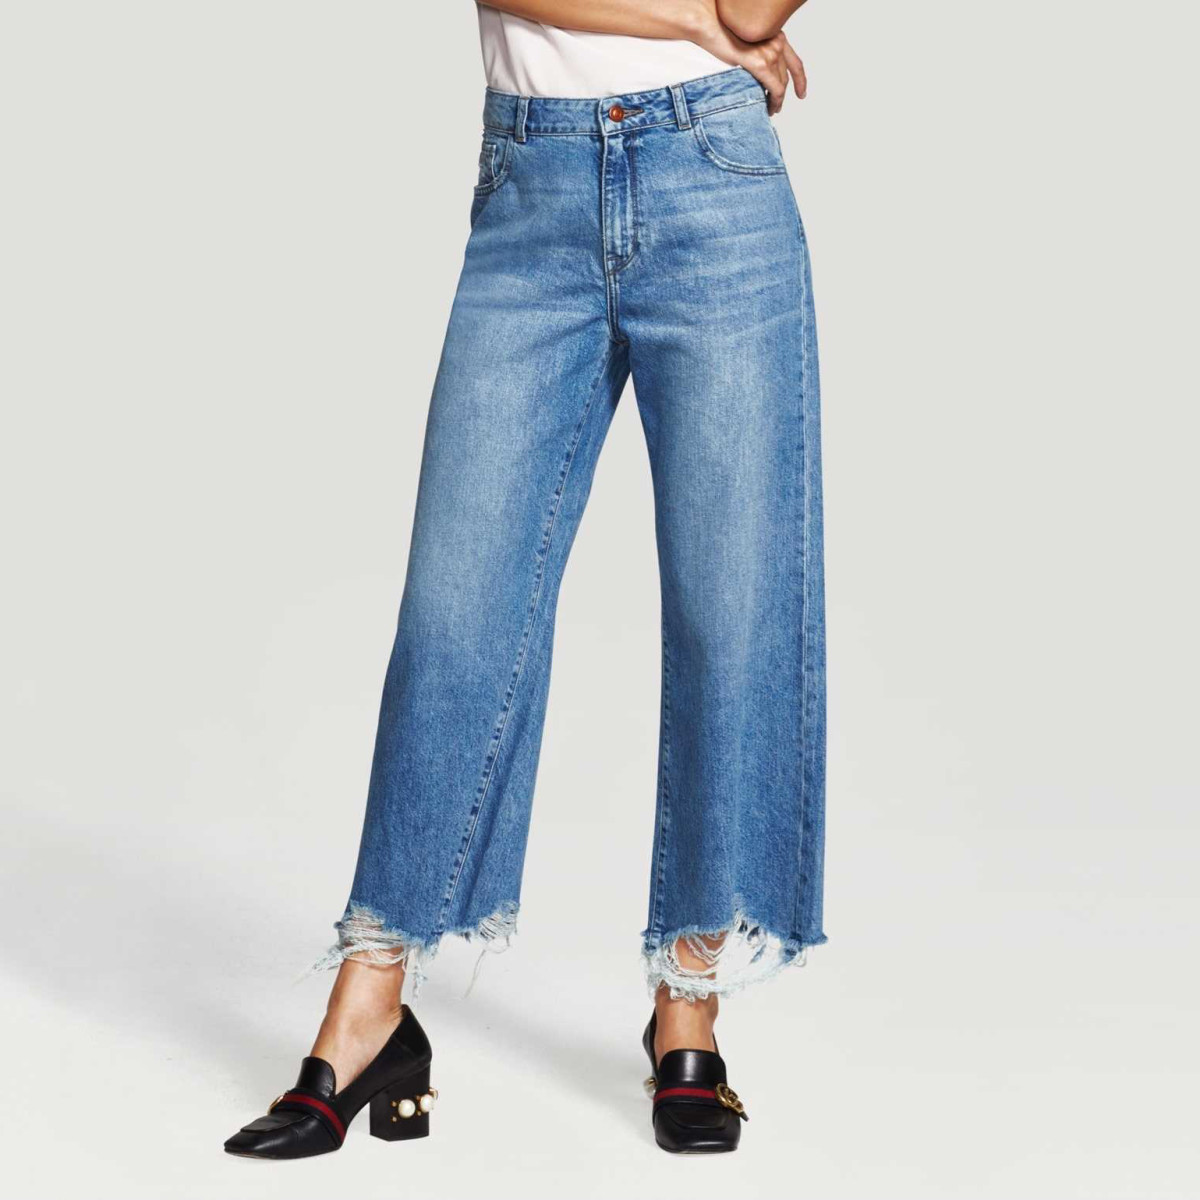 Hepburn high rise jeans, $198, available at DL1961